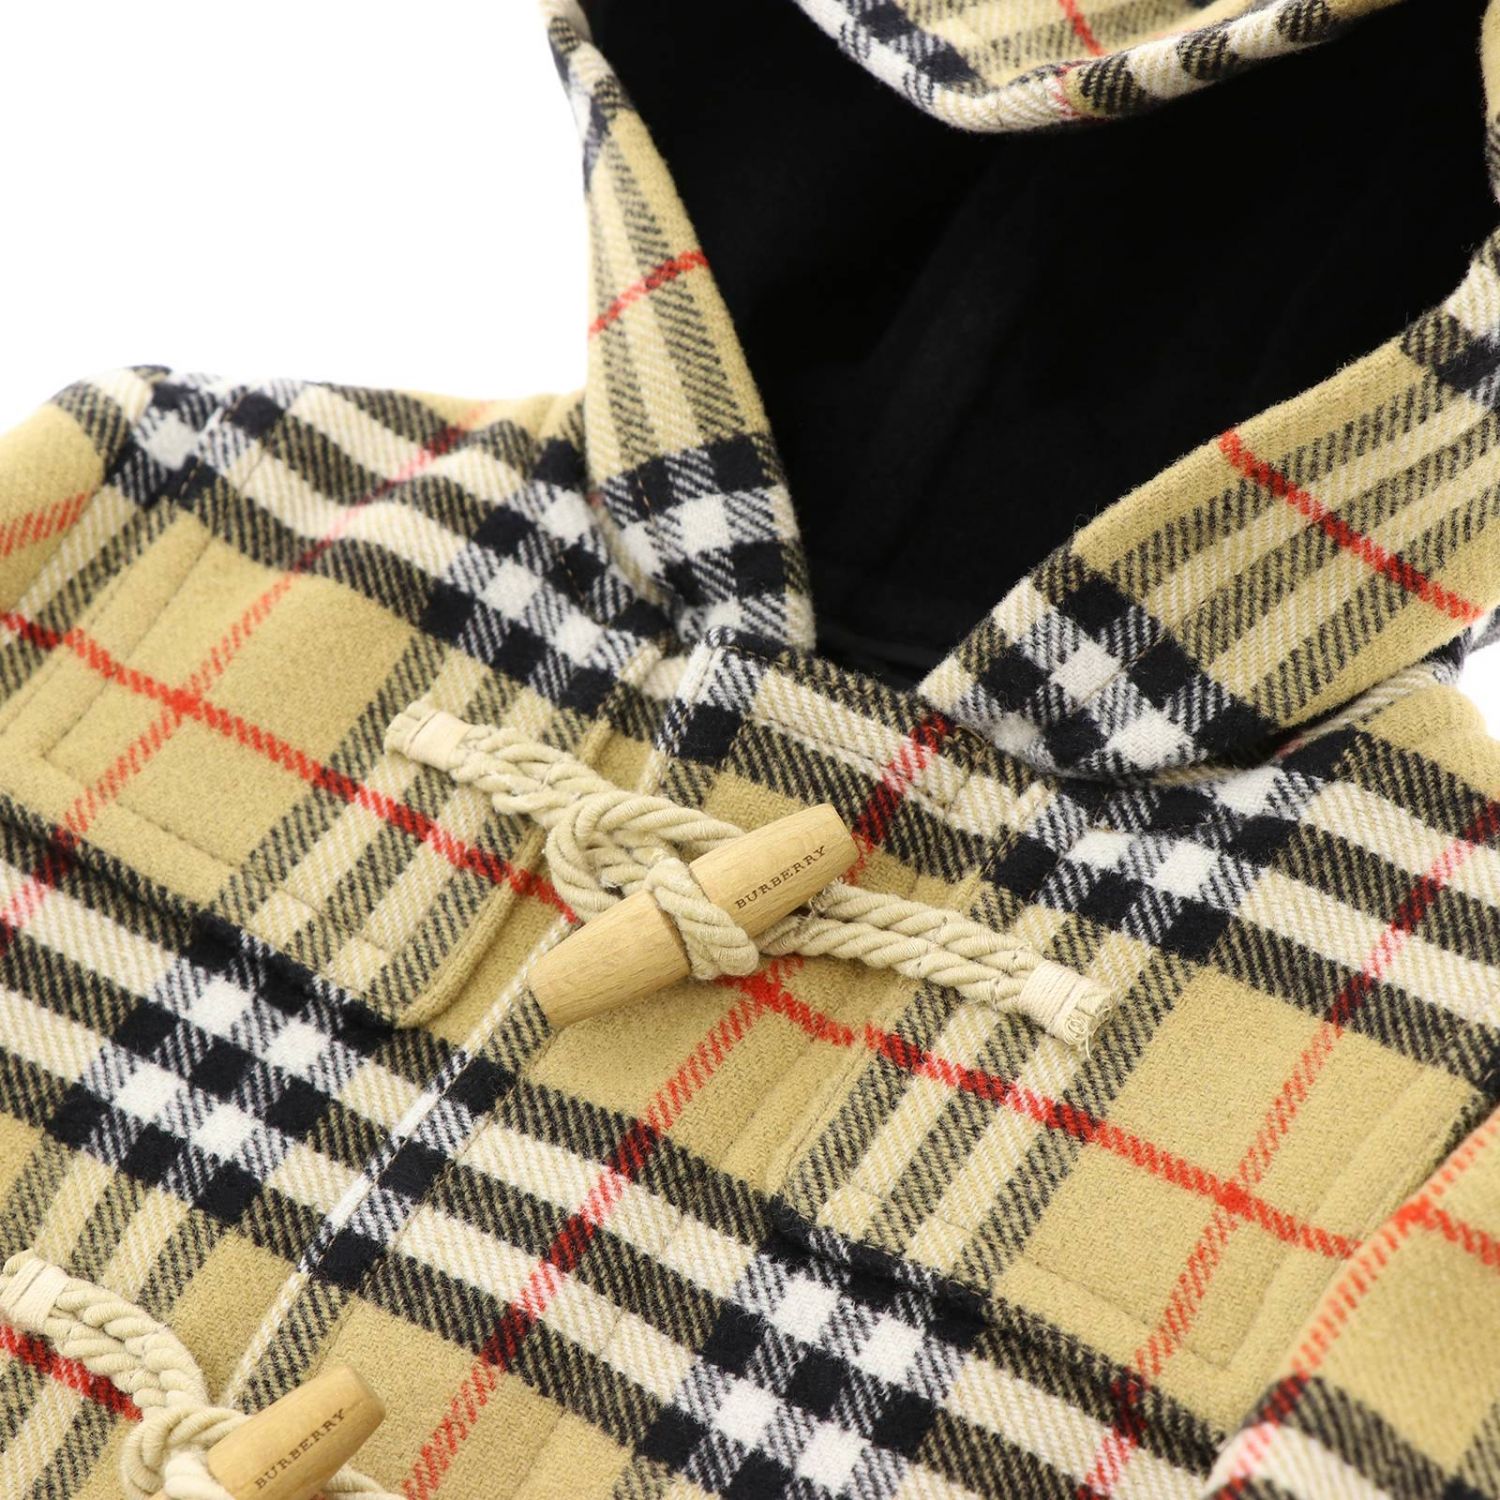 burberry layette